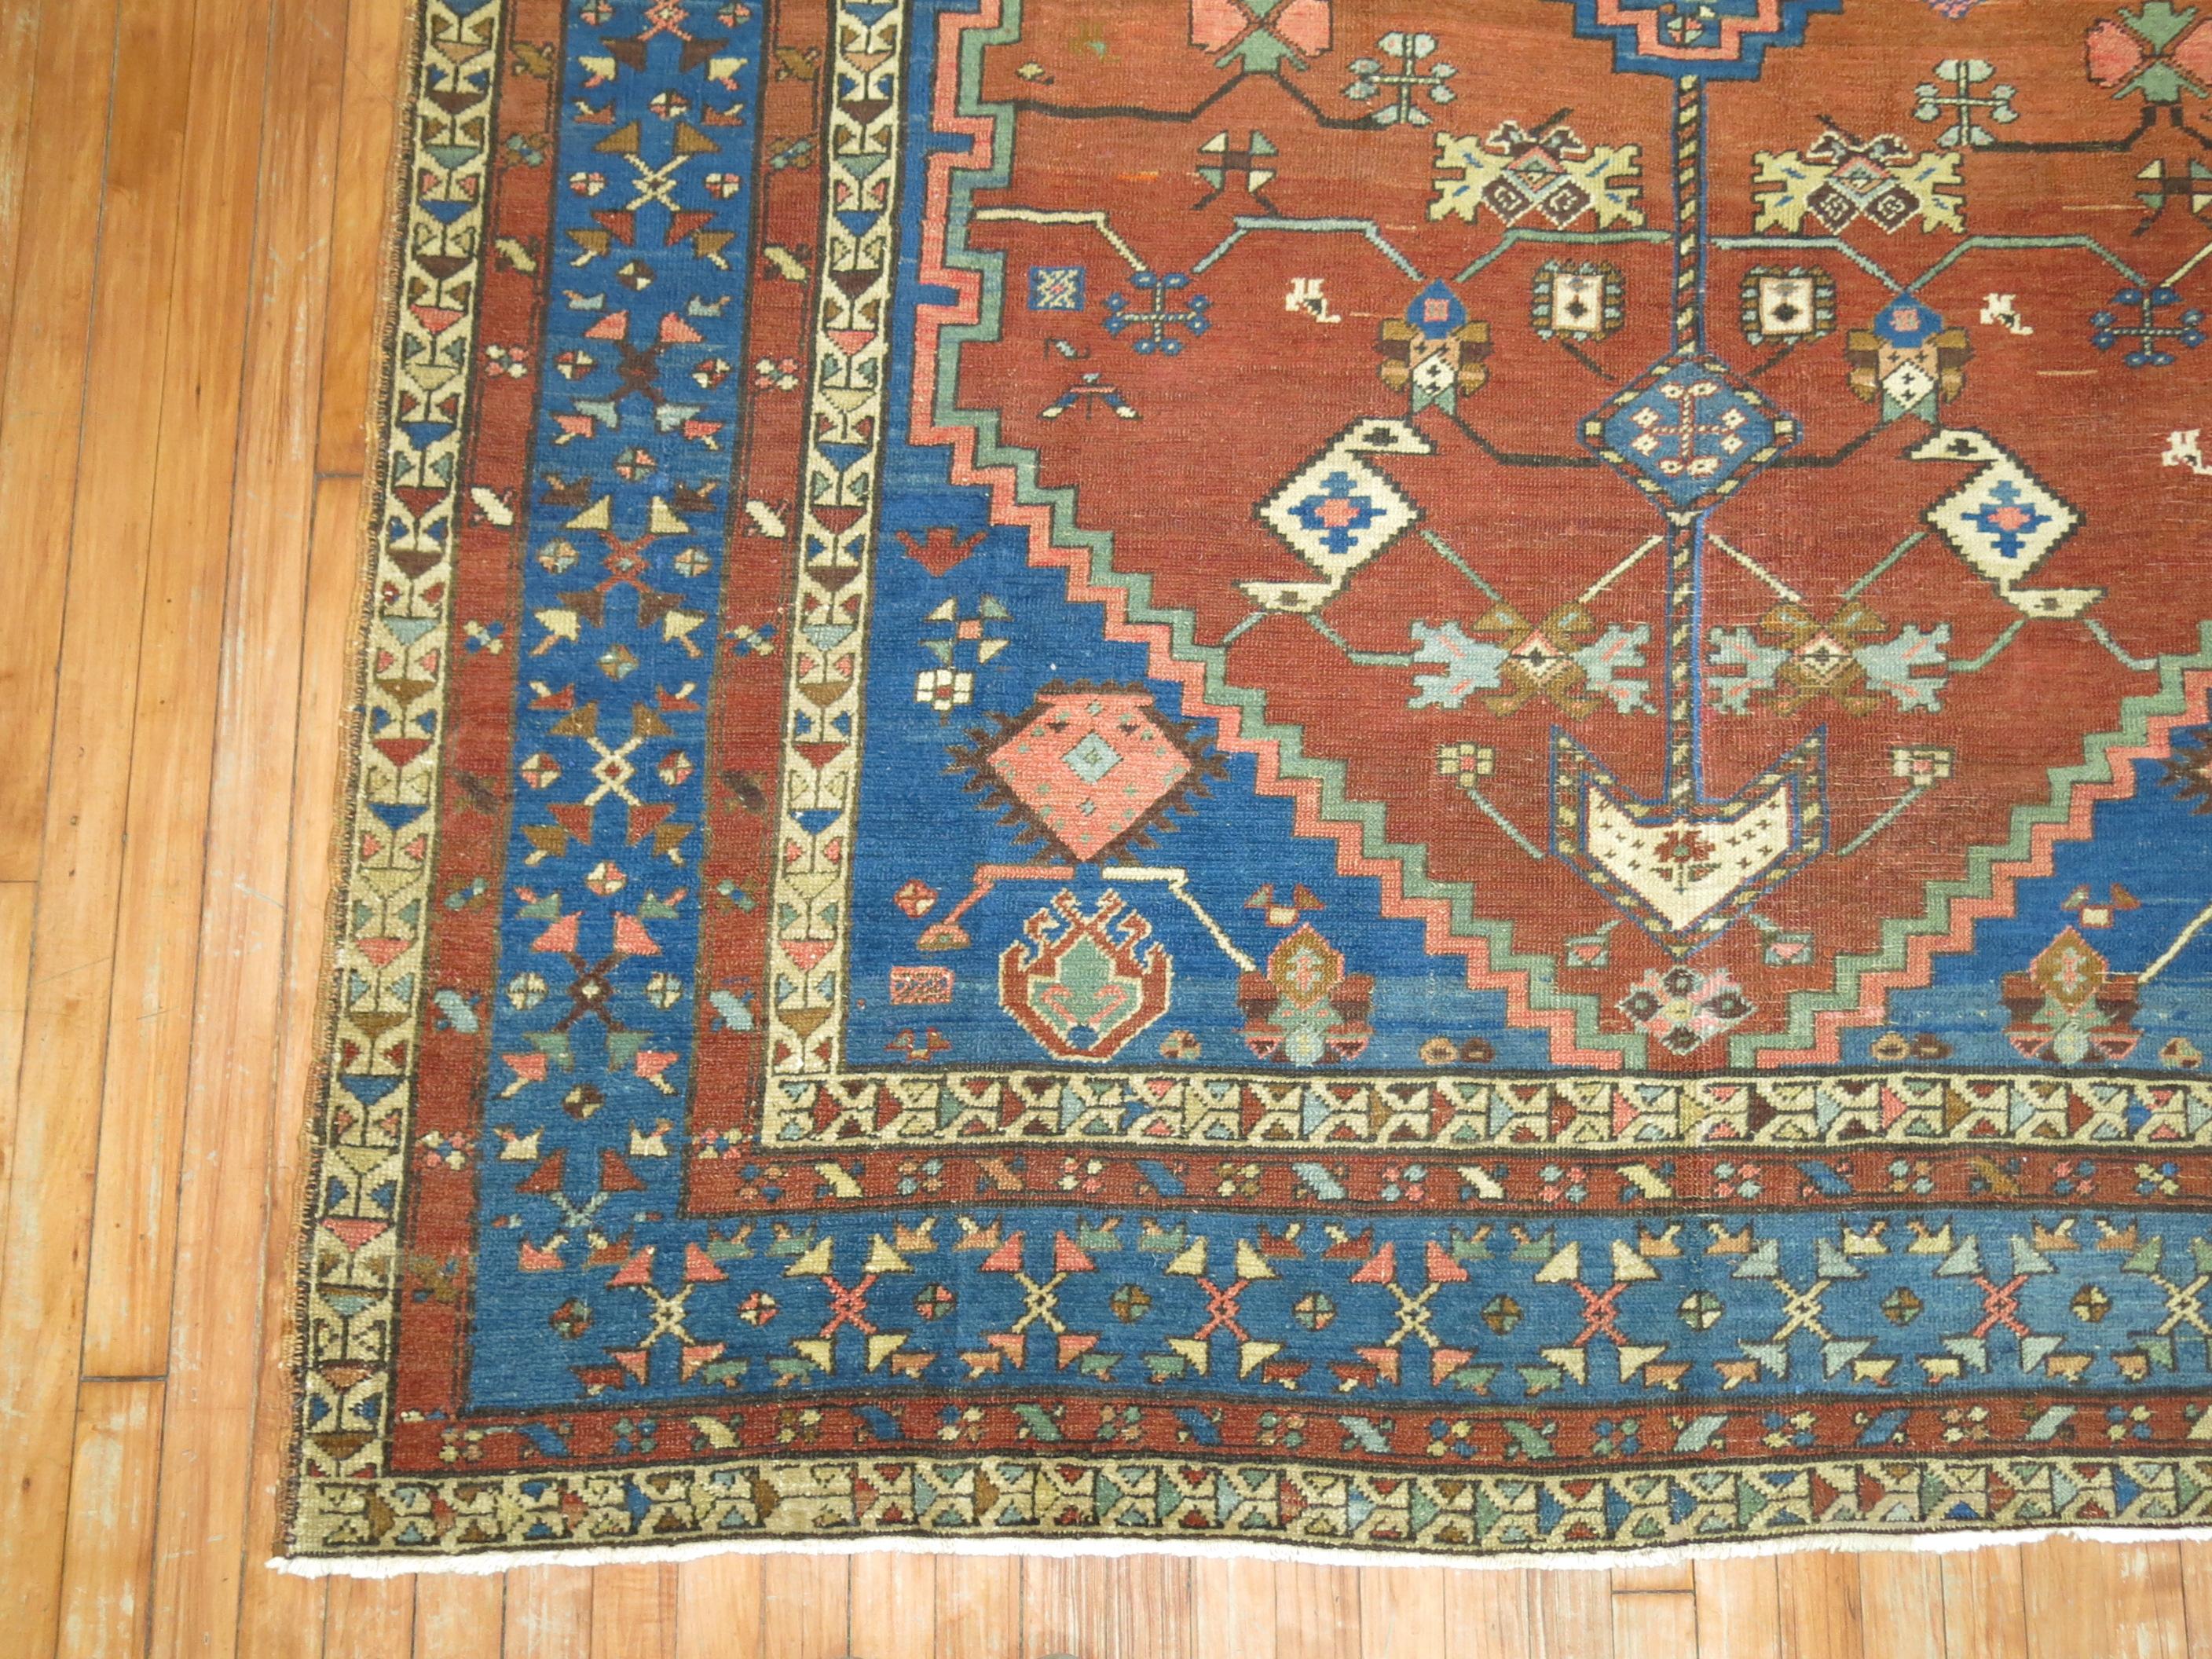 A rare size early 20th century Persian Bakshaish Rug.

Bakshaish weavers employed both soft orange and soft blue accents for the base color of the field, with the use of ivory or camelhair grouns being particularly rare and beloved. Exceptional